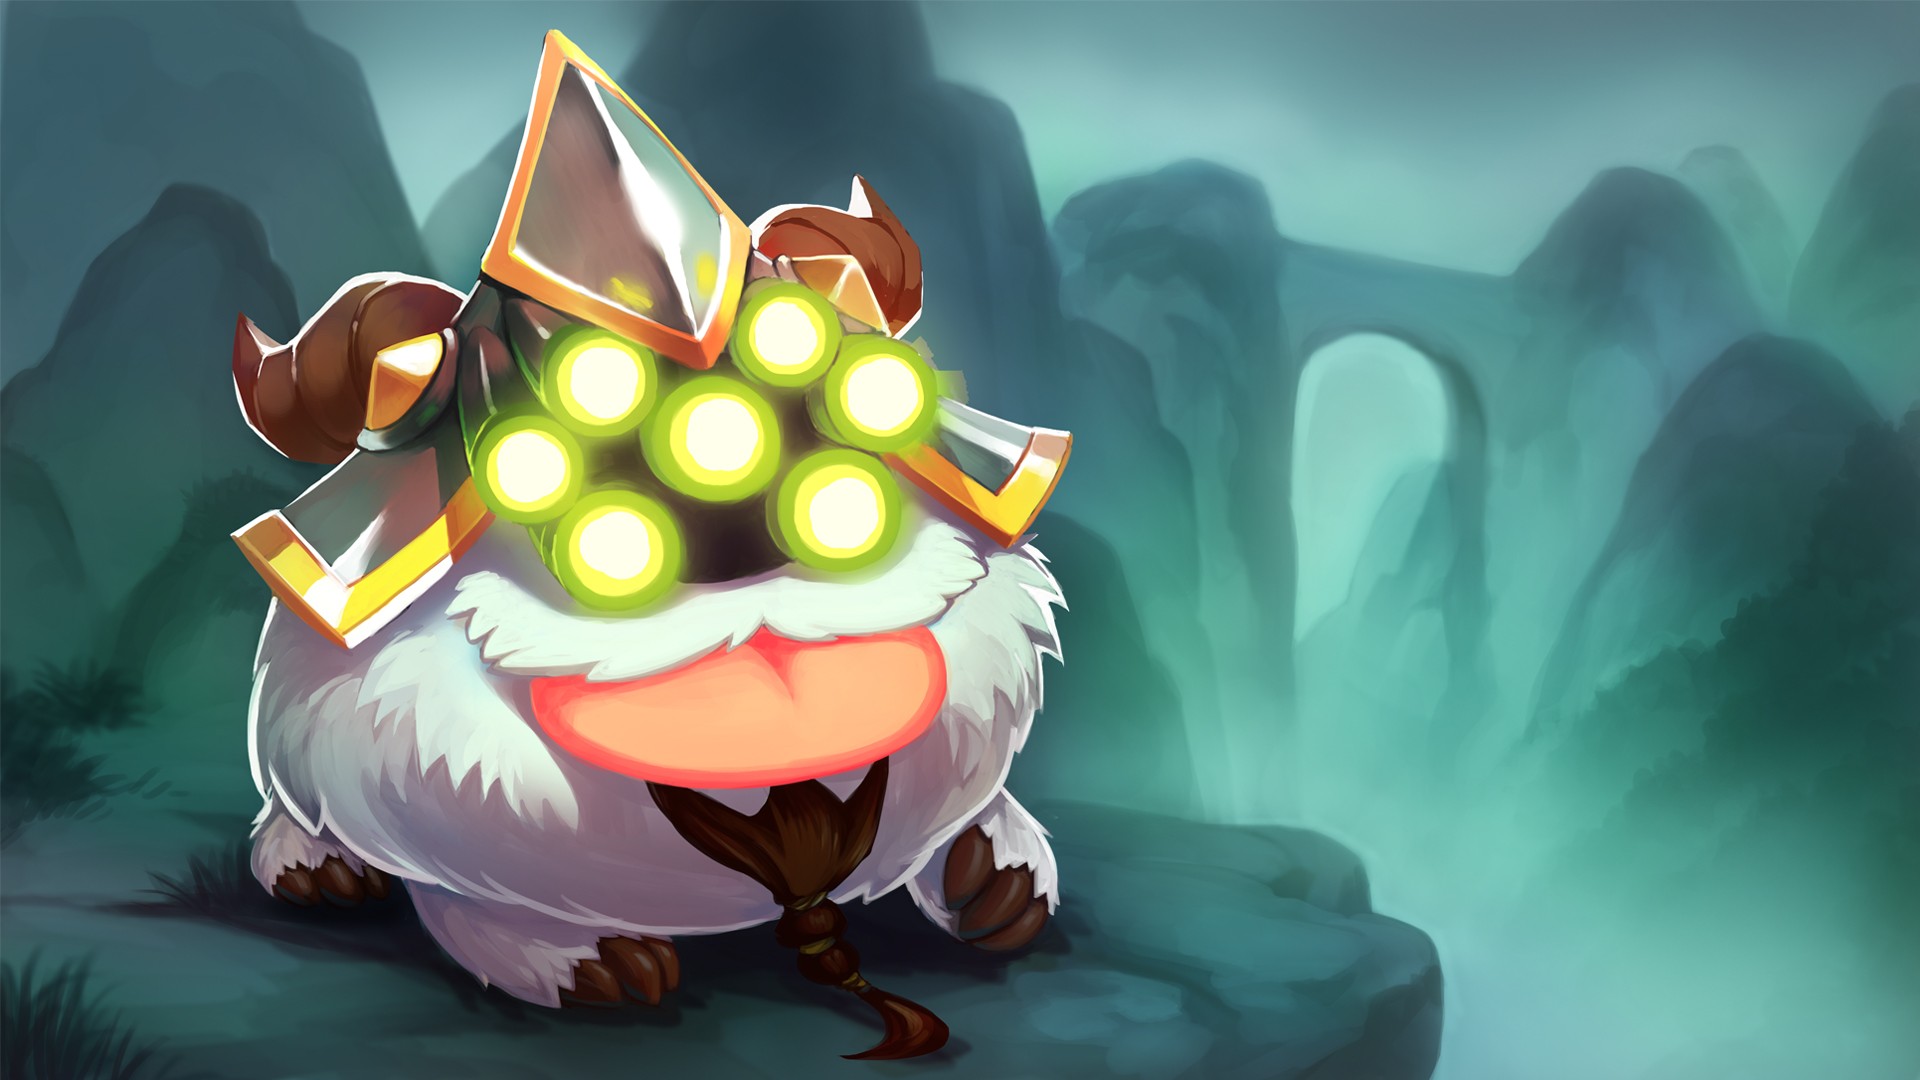 General 1920x1080 League of Legends master yi (league of legends) Poro (League of Legends) PC gaming video game art video game characters